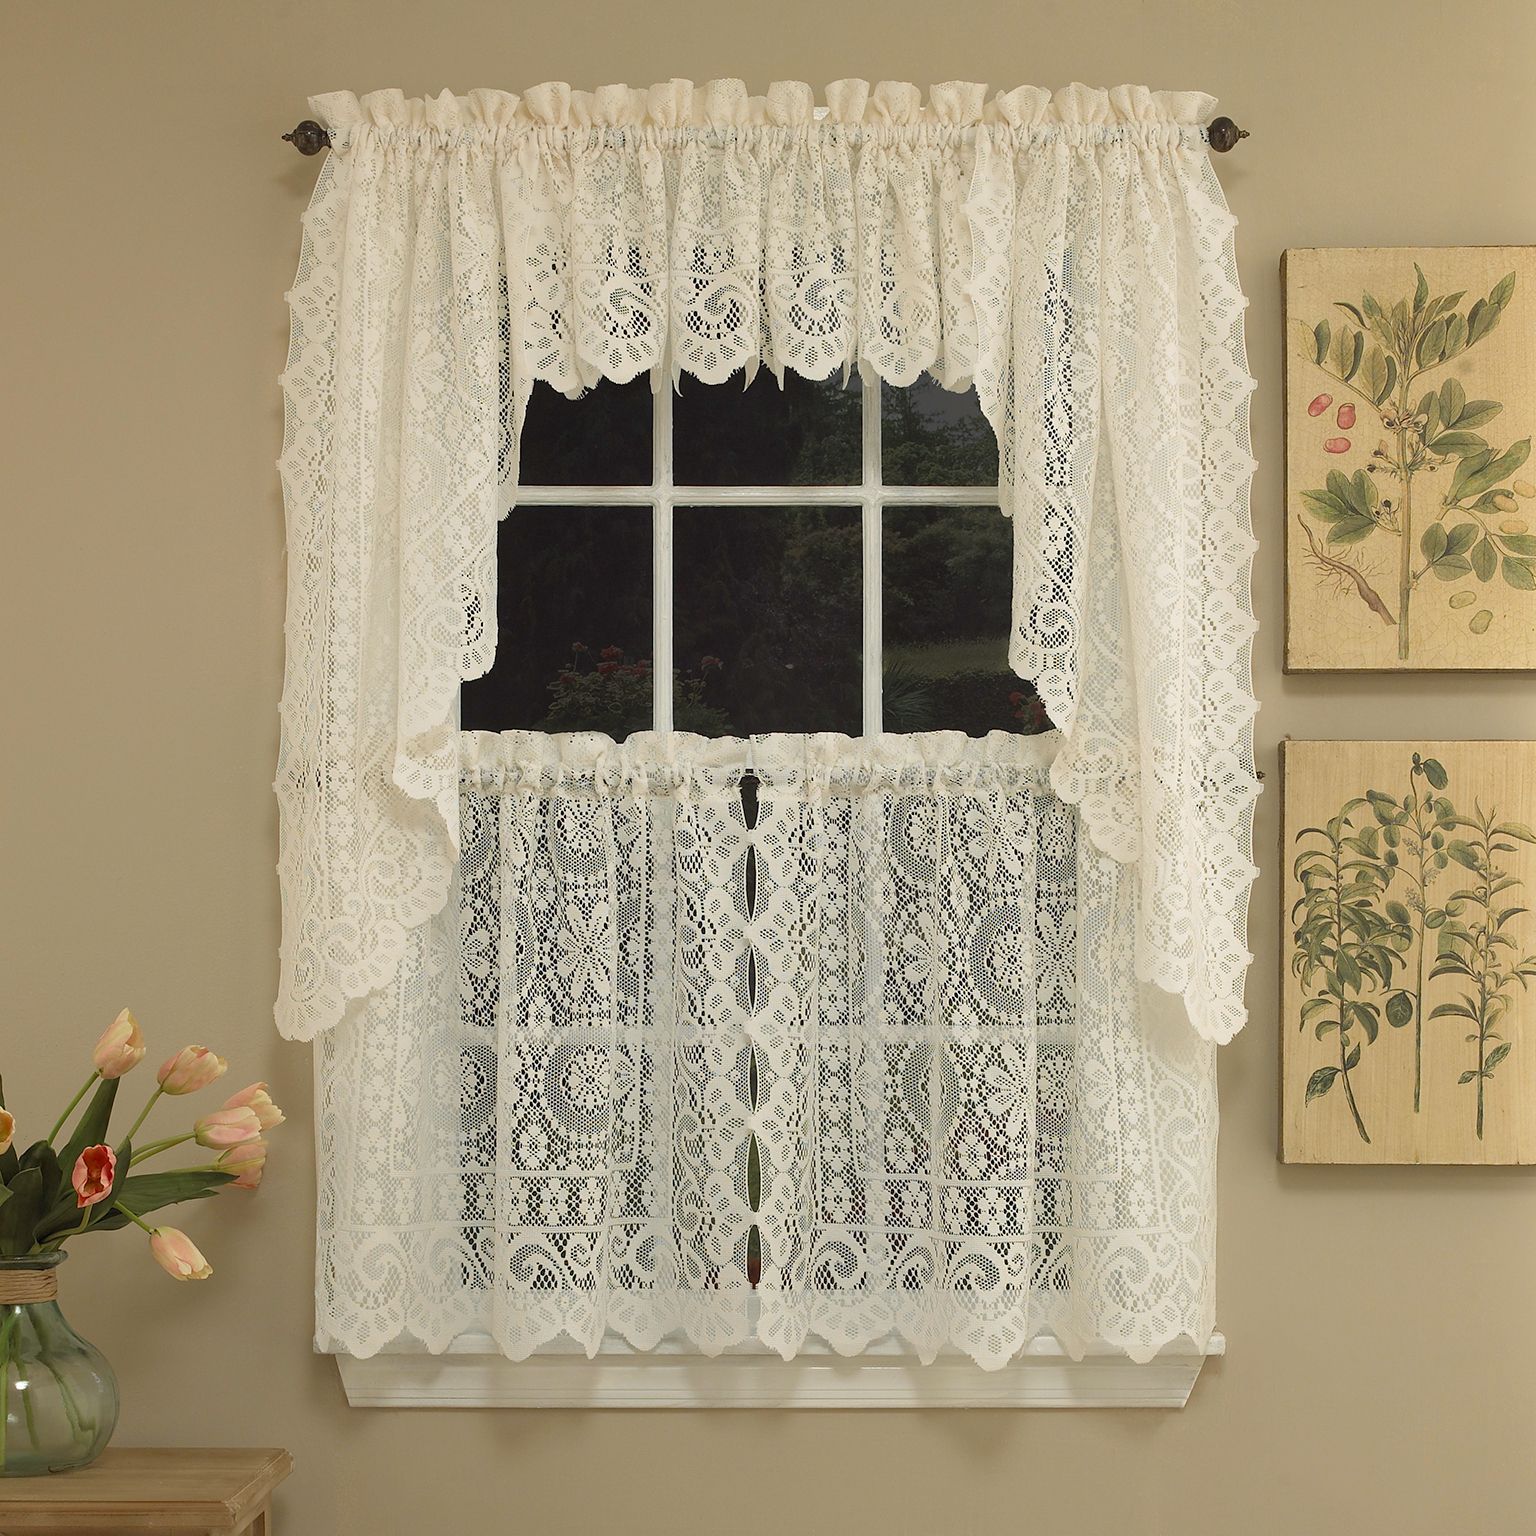 Details About Hopewell Heavy Cream Lace Kitchen Curtain Choice Of Tier  Valance Or Swag With Elegant White Priscilla Lace Kitchen Curtain Pieces (View 12 of 20)